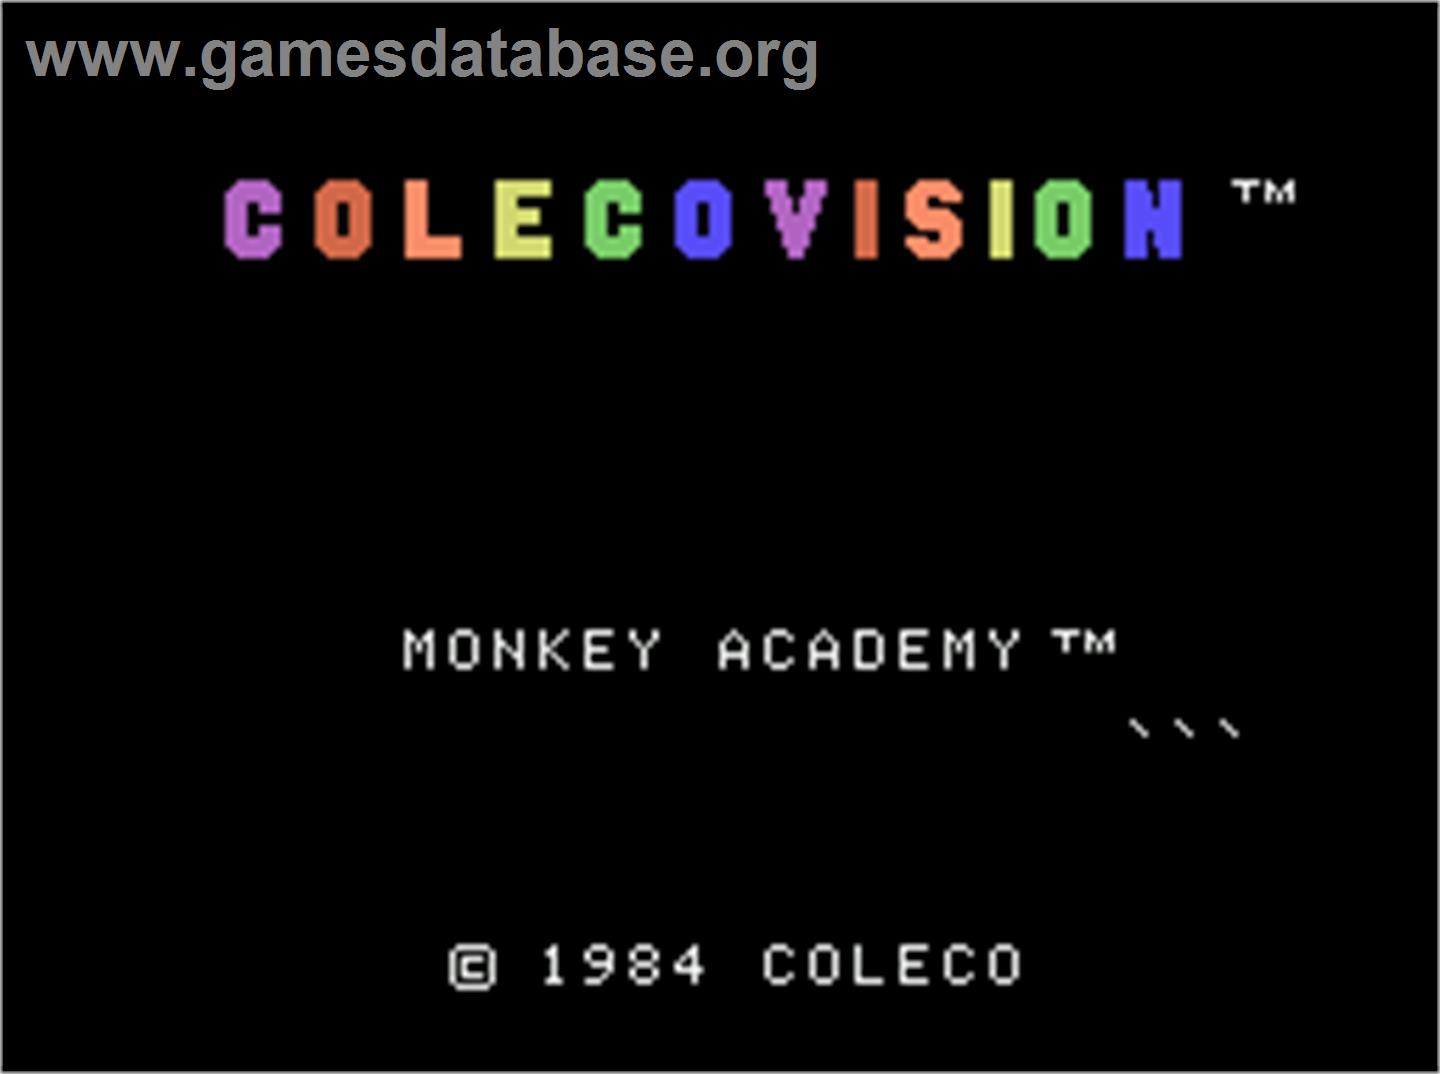 Monkey Academy - Coleco Vision - Artwork - Title Screen